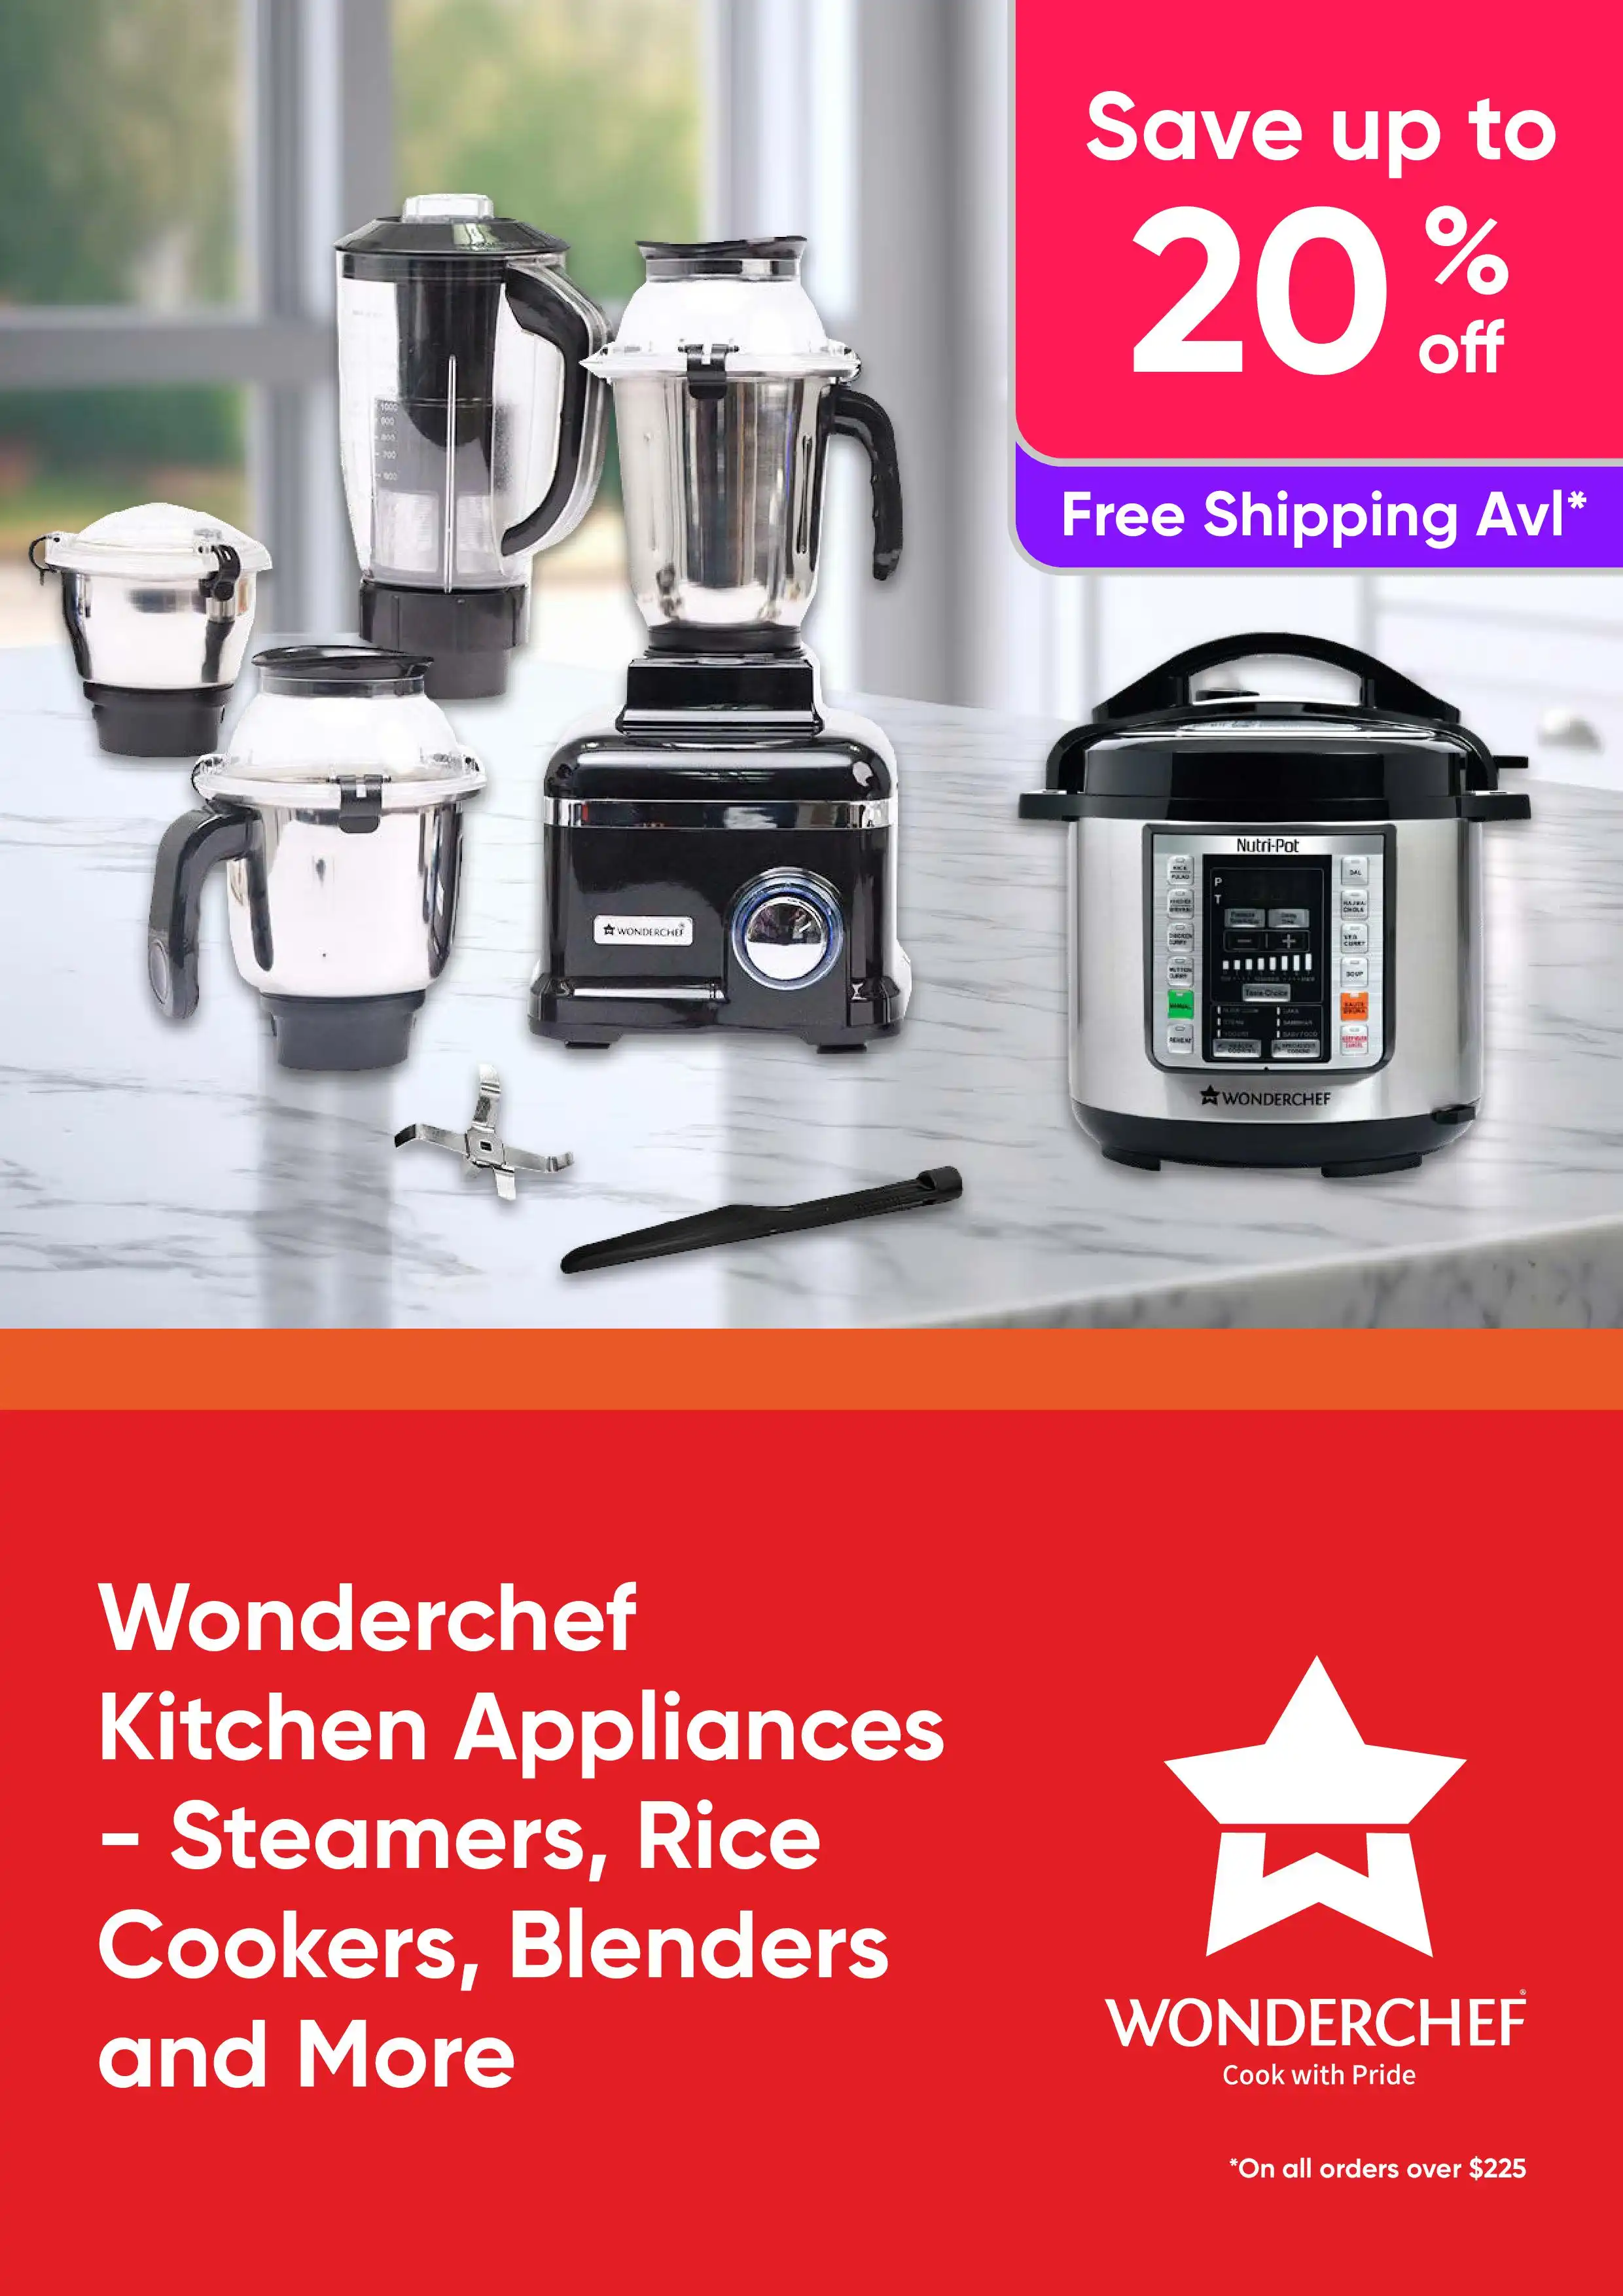 Save Up to 20% Off Wonderchef Kitchen Appliances - Shop Steamers, Rice Cookers, Blenders and More